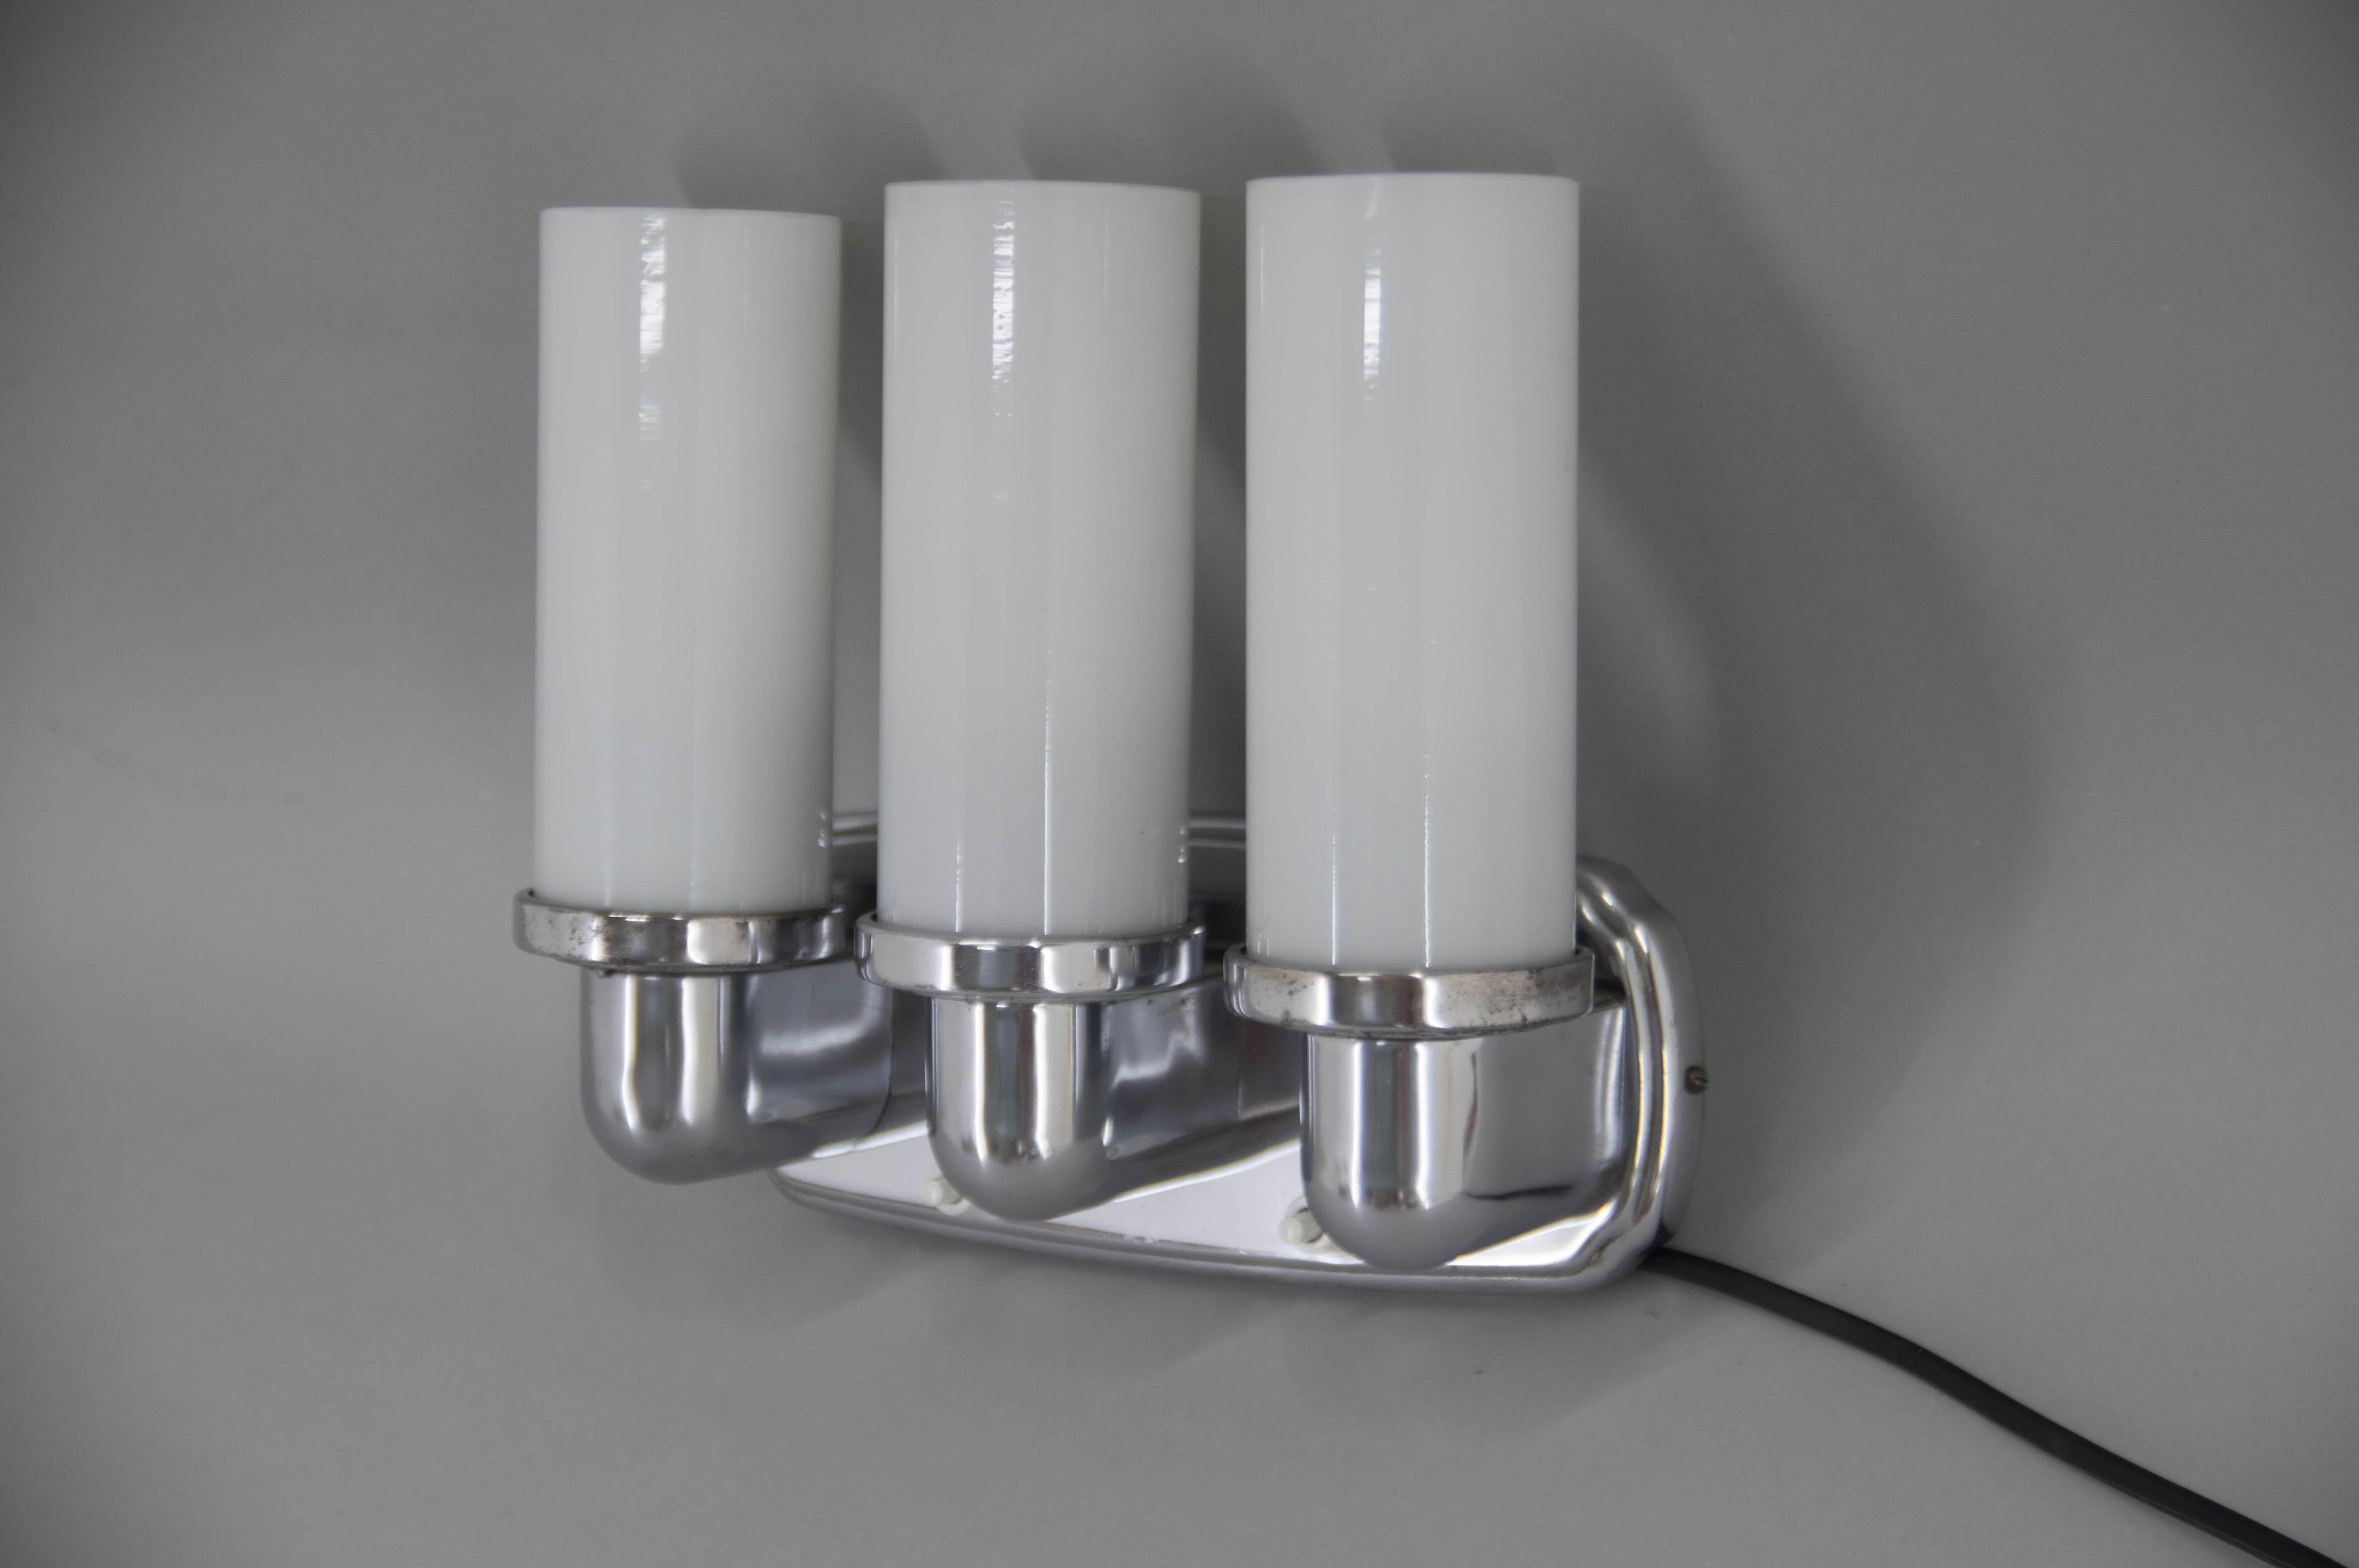 Unique tubular Art Deco wall light with three opaline glass shades.
Glass in perfect condition.
Cleaned, polished and rewired.
Two separate switches - one or two or all lights can be on.
3xE12-E14 bulbs
US wiring compatible
Shipping quote on request.